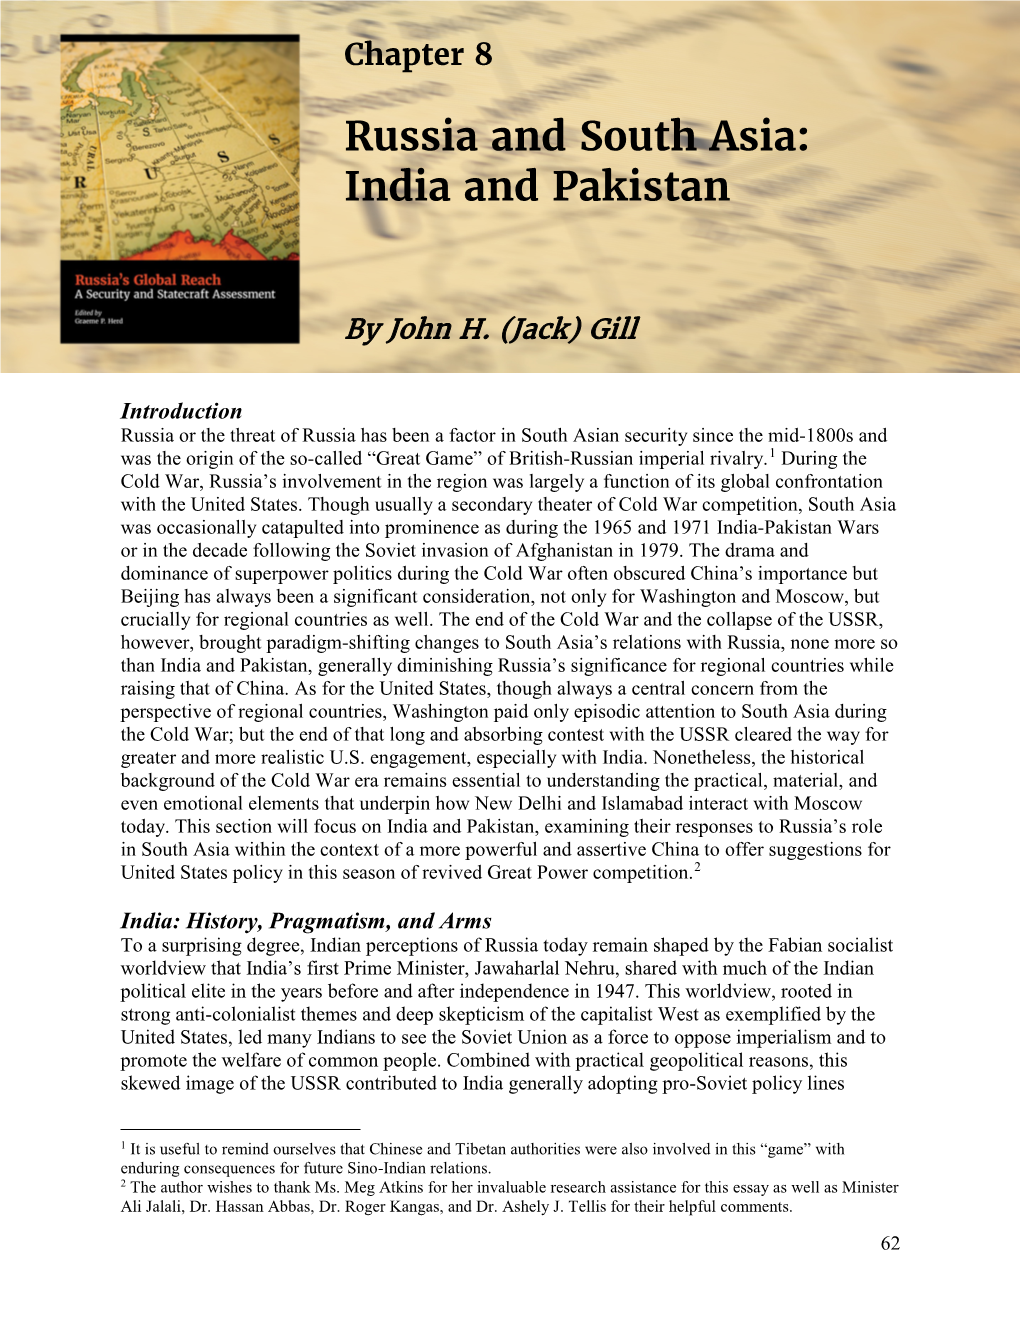 Chapter 8 Russia and South Asia: India and Pakistan